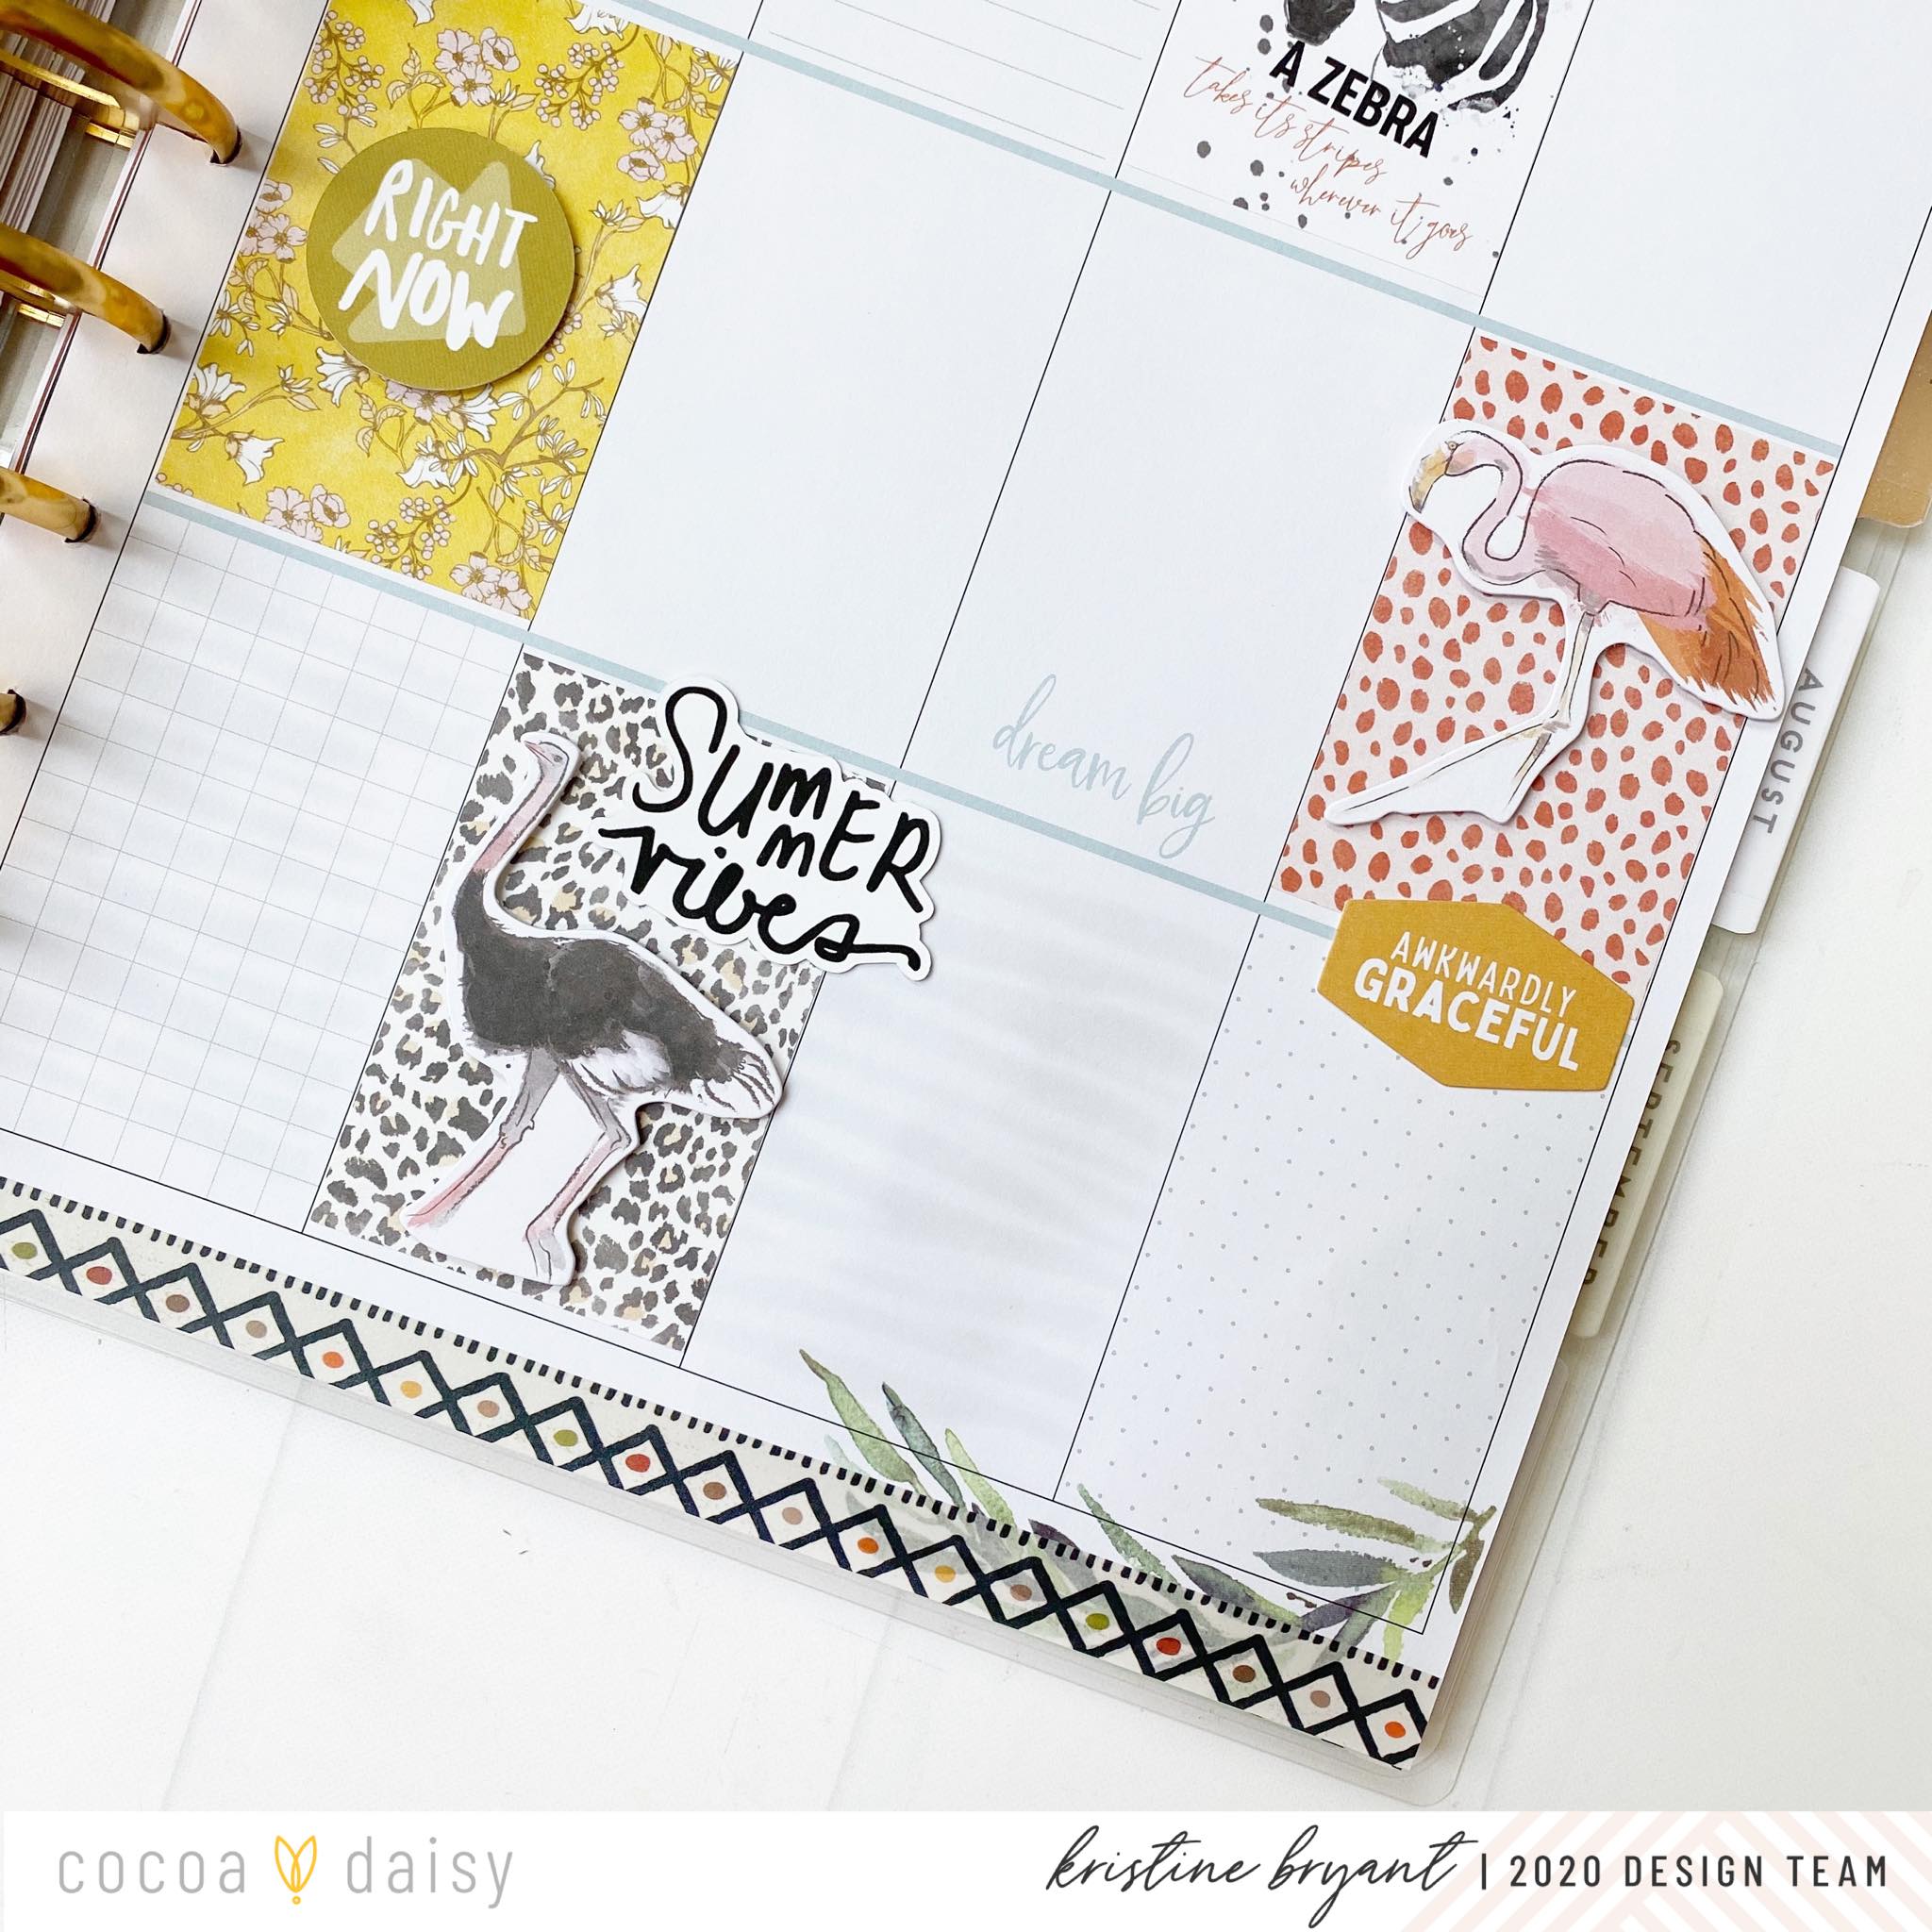 8 Ideas for Using Our Stickers from Kristine and Korrieann